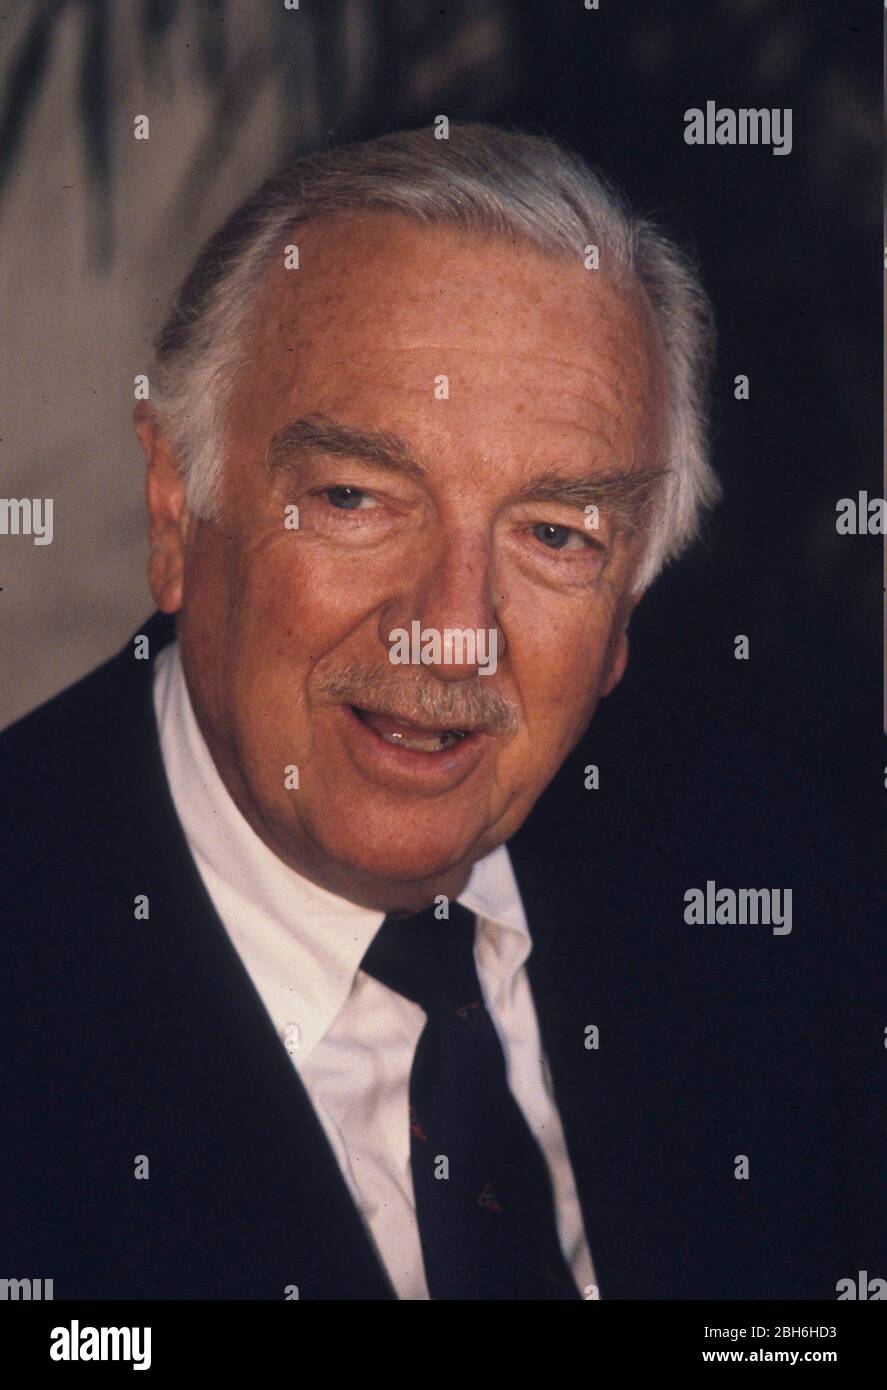 Austin, TX May 1989: CBS newsman Walter Cronkite speaks at a press conference for the Lower Colorado River Authority after narrating a video on environmental protection for the central Texas agency.  Cronkite, 92, died July 17th in New York.   ©Bob Daemmrich Stock Photo